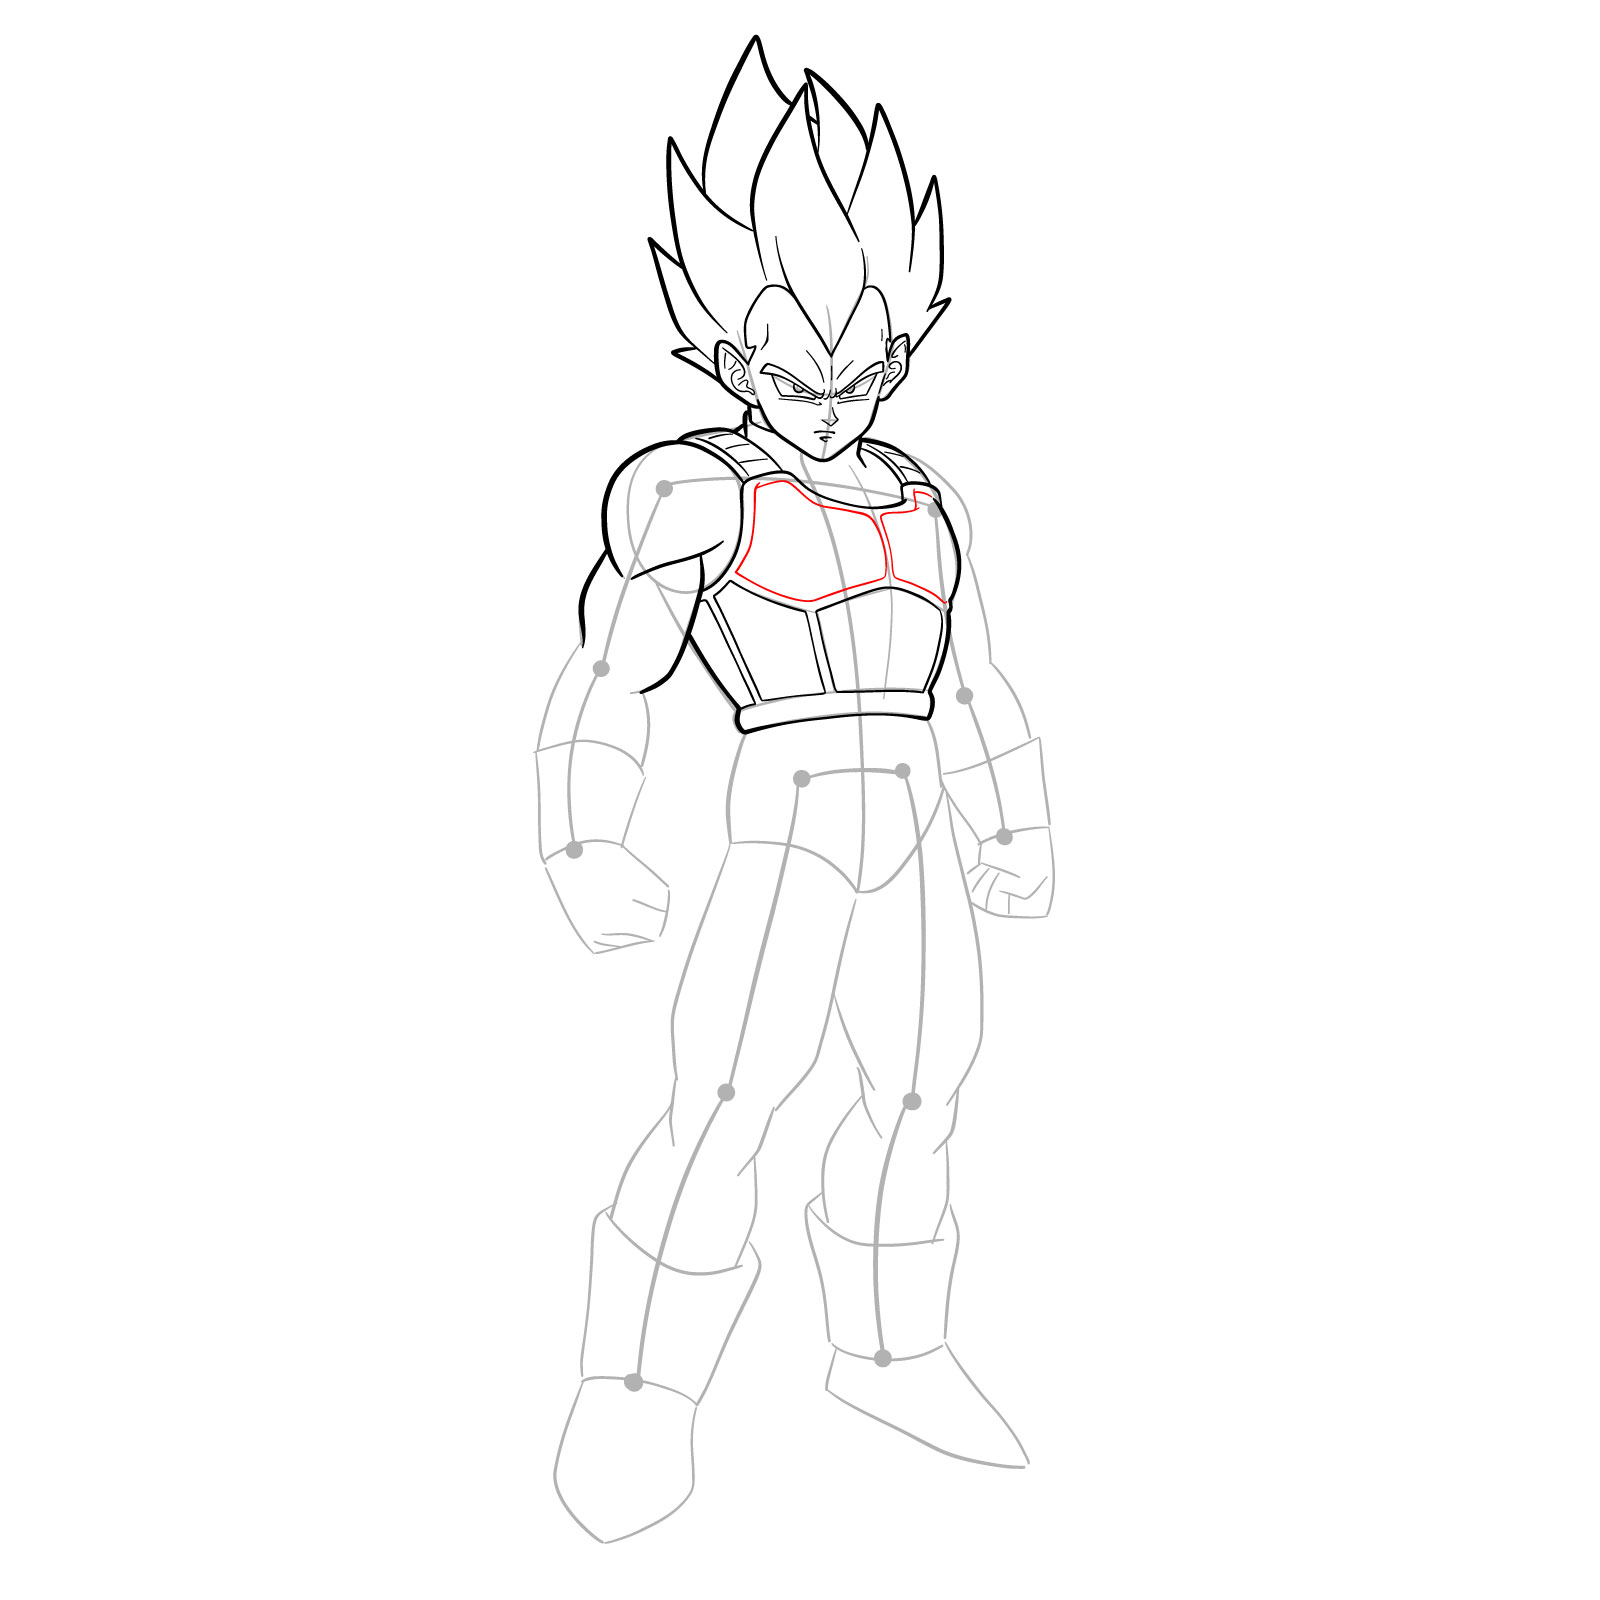 How to draw Vegeta in SSGSS - step 23